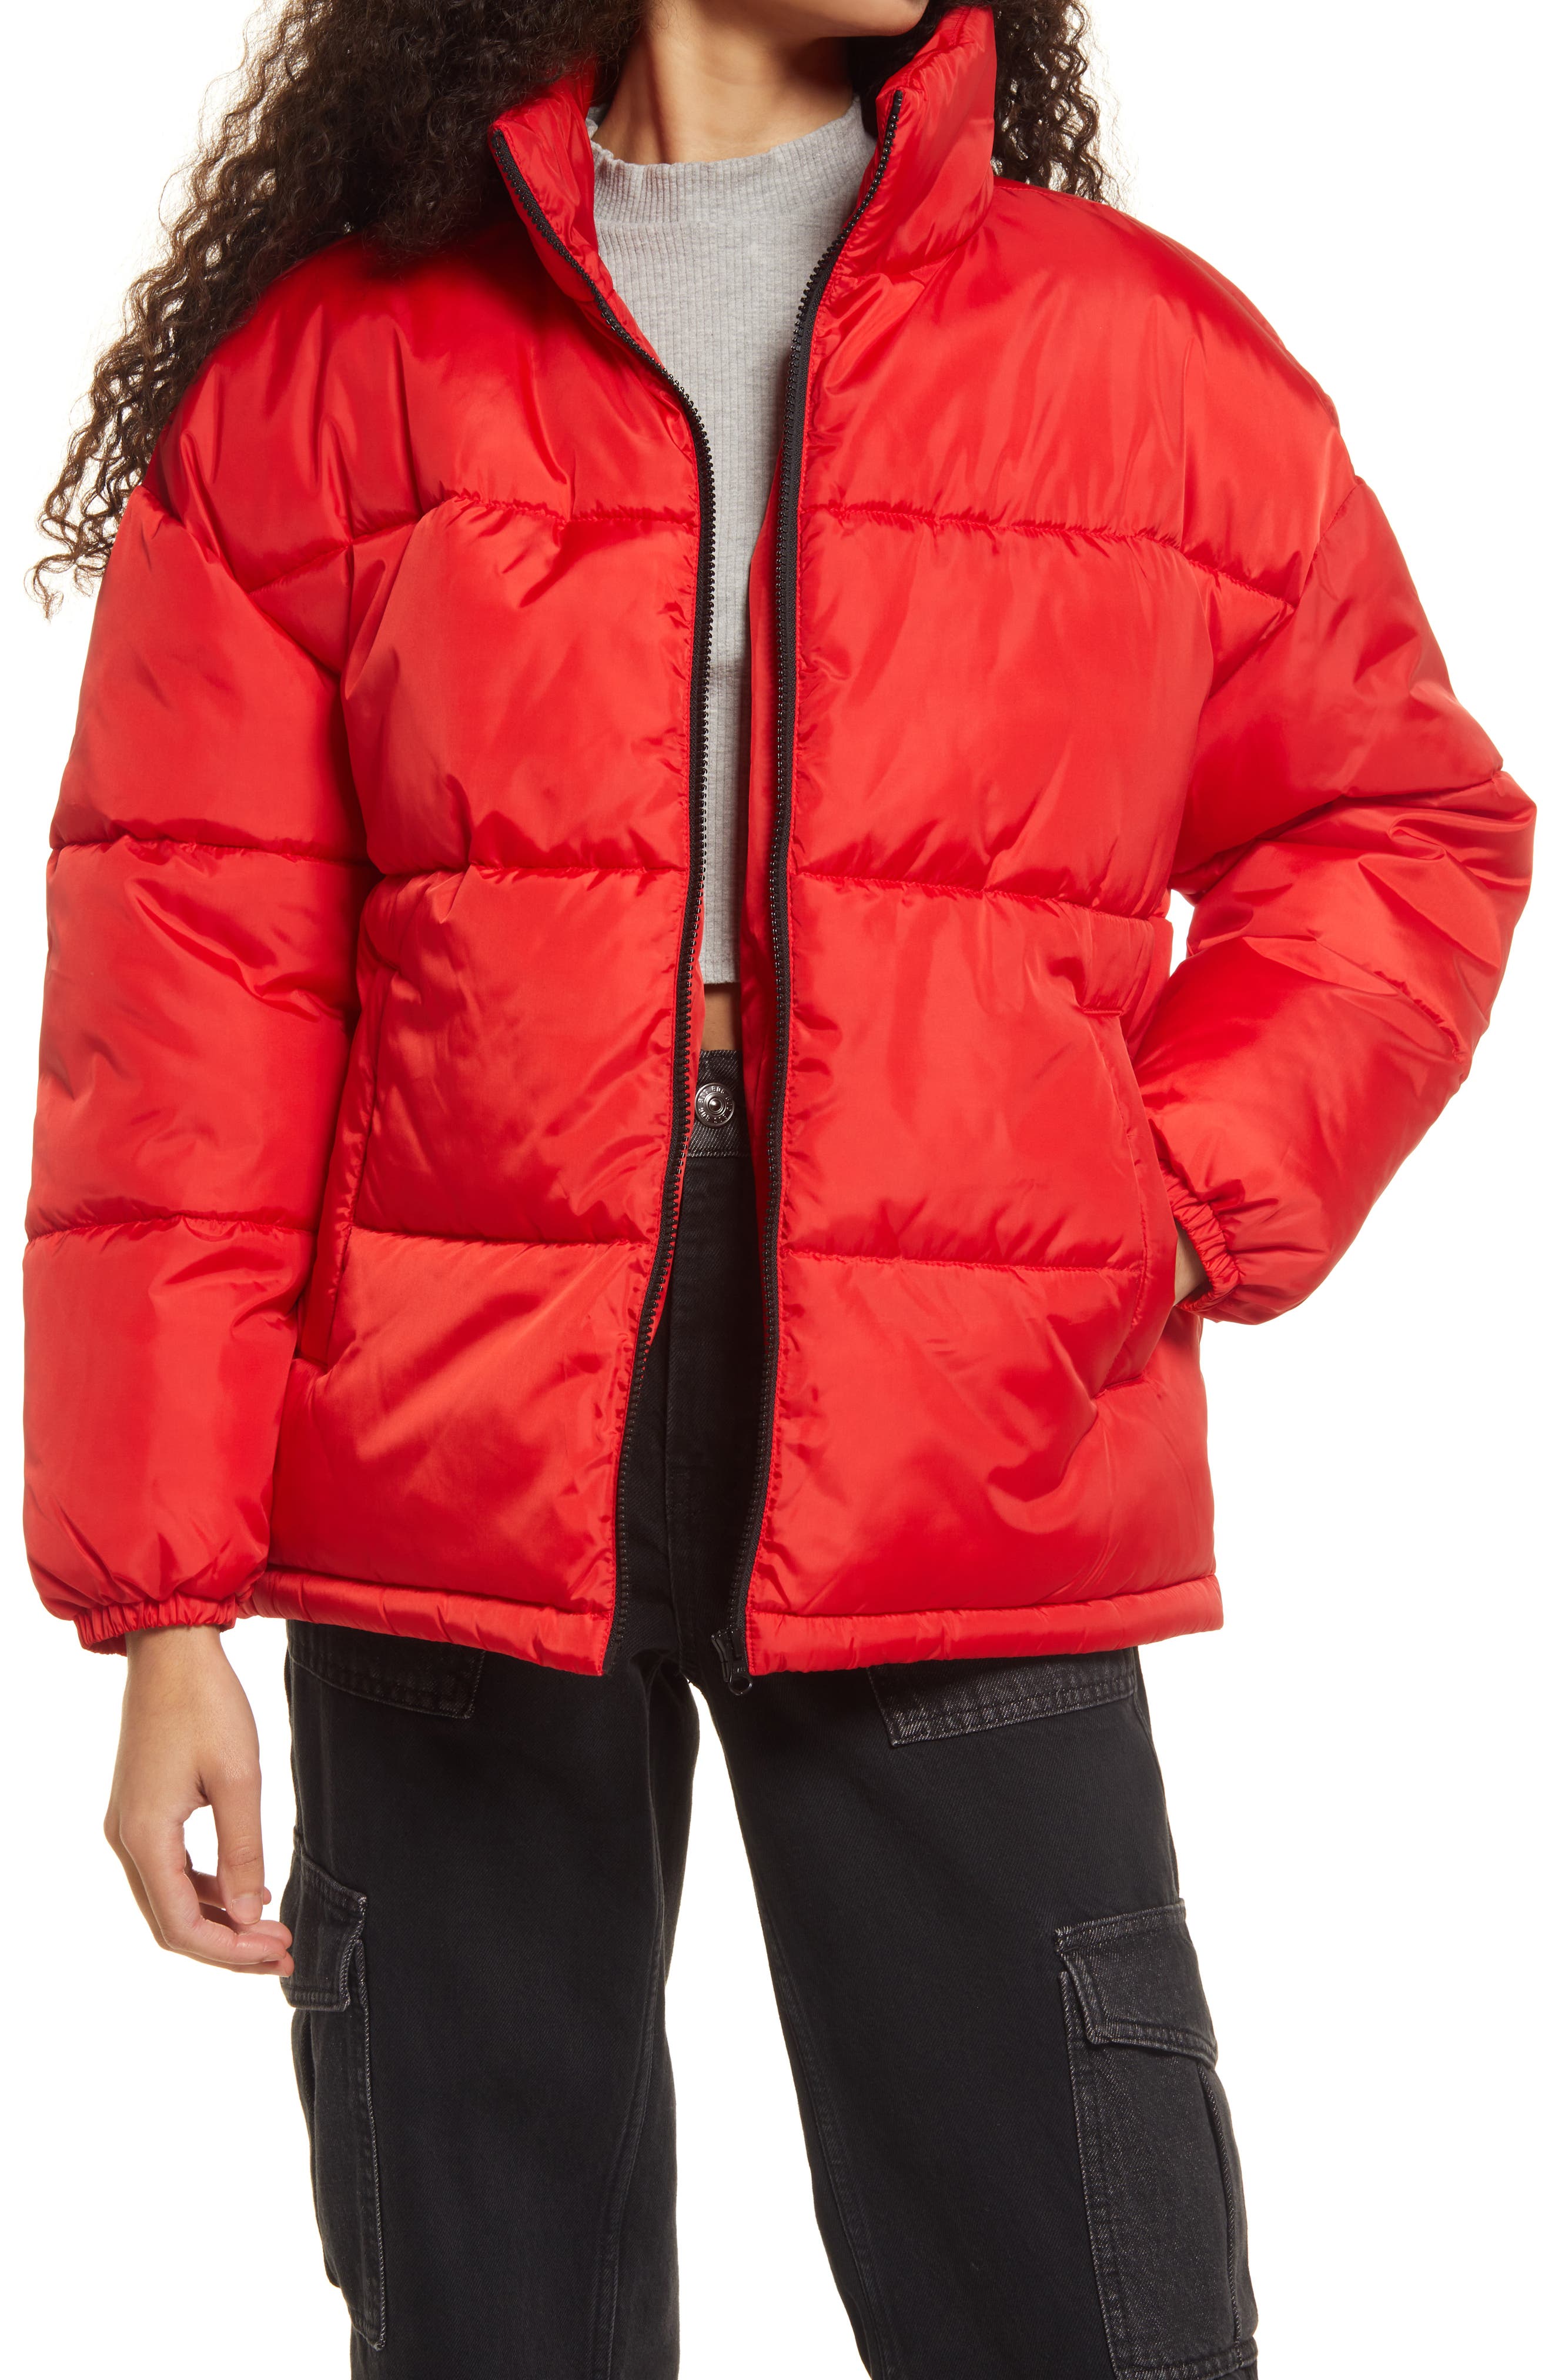 red oversized puffer jacket